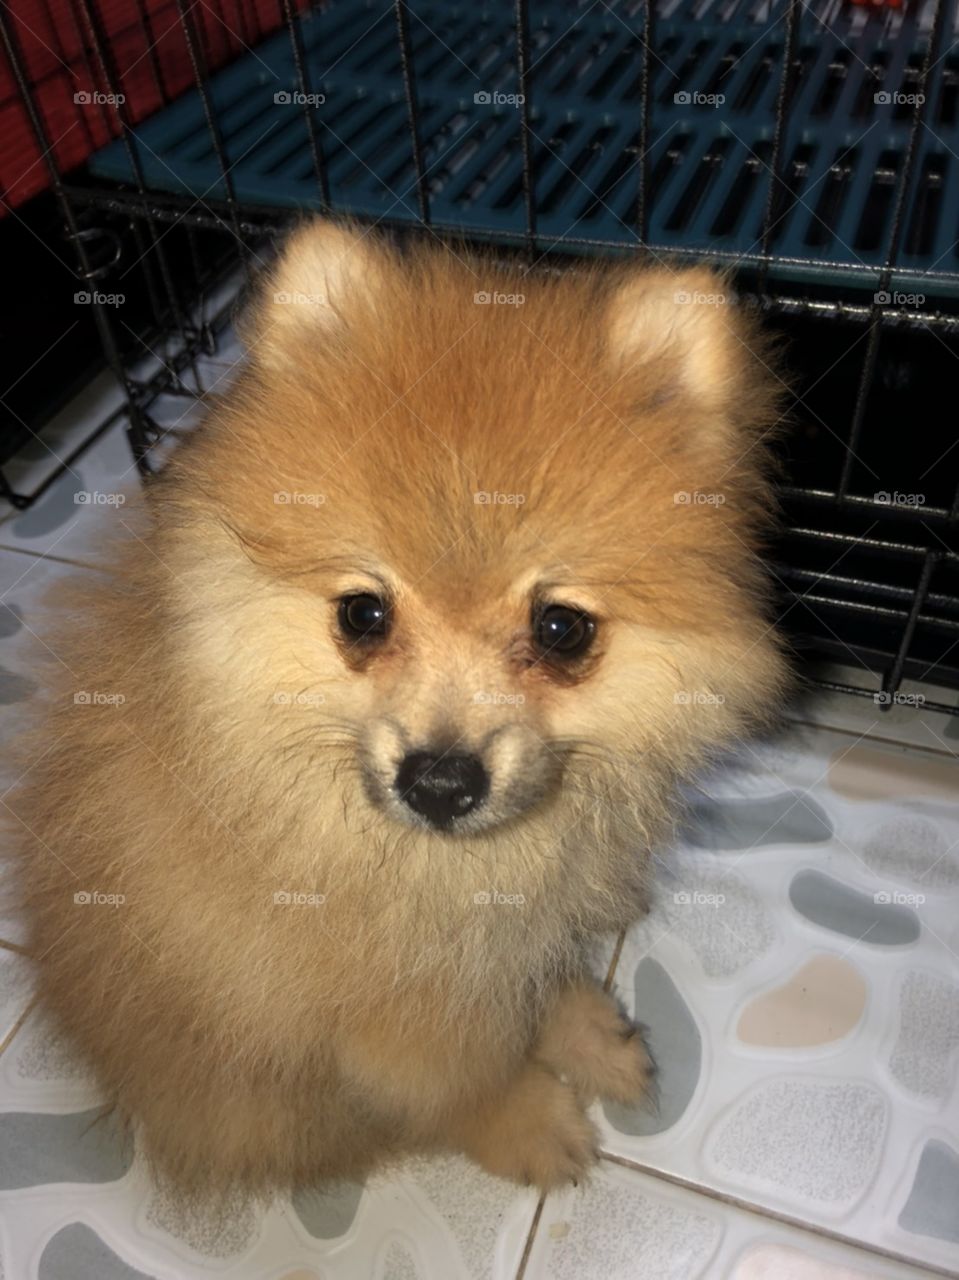 the male lovely puppy "pomeranian" has fluffy and furry brown hair.